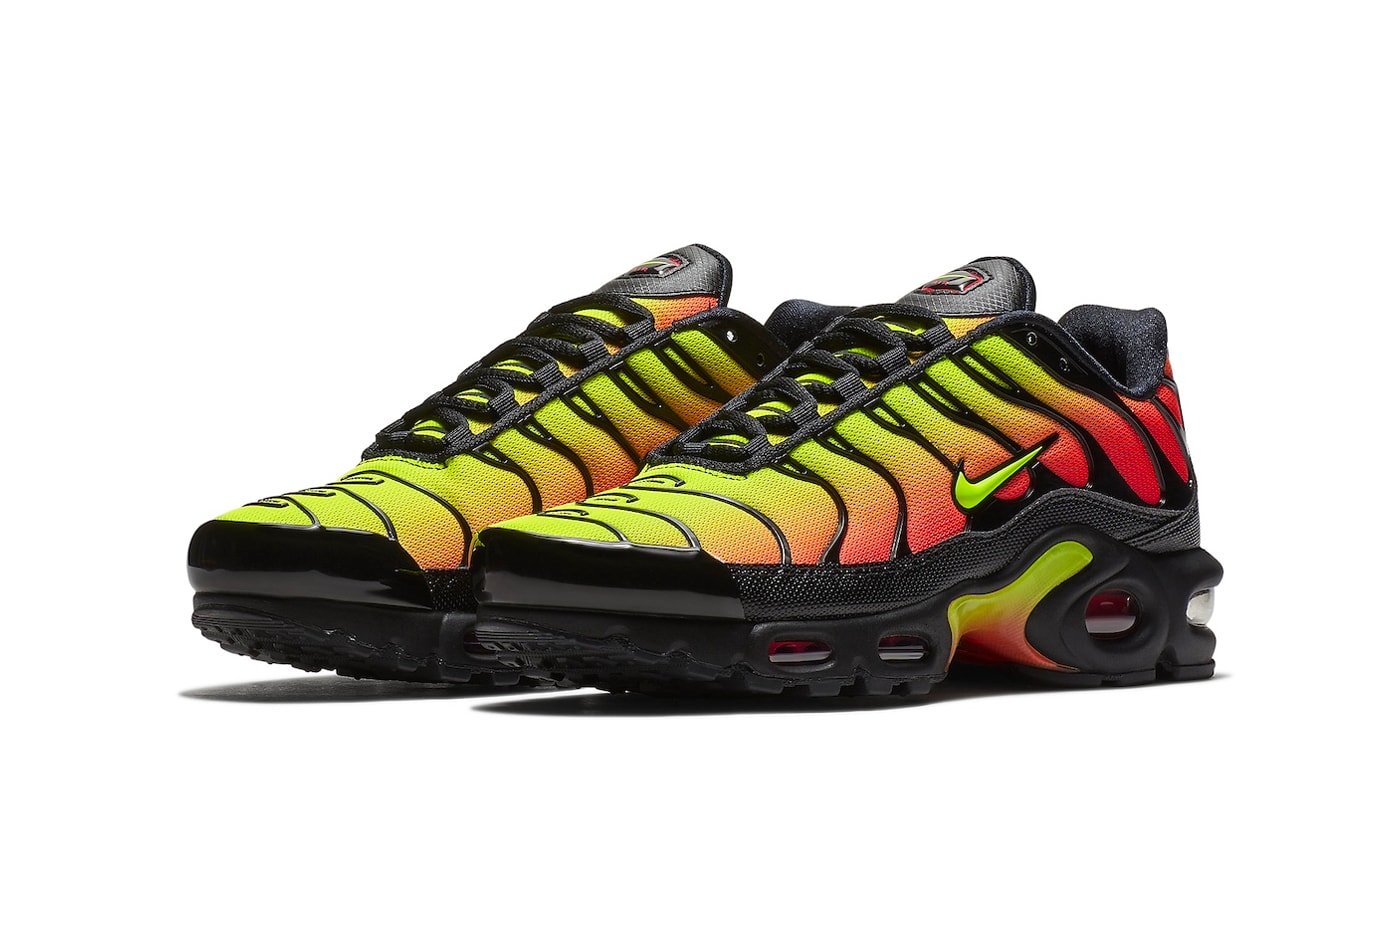 Nike Air Max Plus "Volt/Solar Red" Slated To Return Late This Year AQ9979-001 black volt solar red swoosh technical shoe vibrant neon